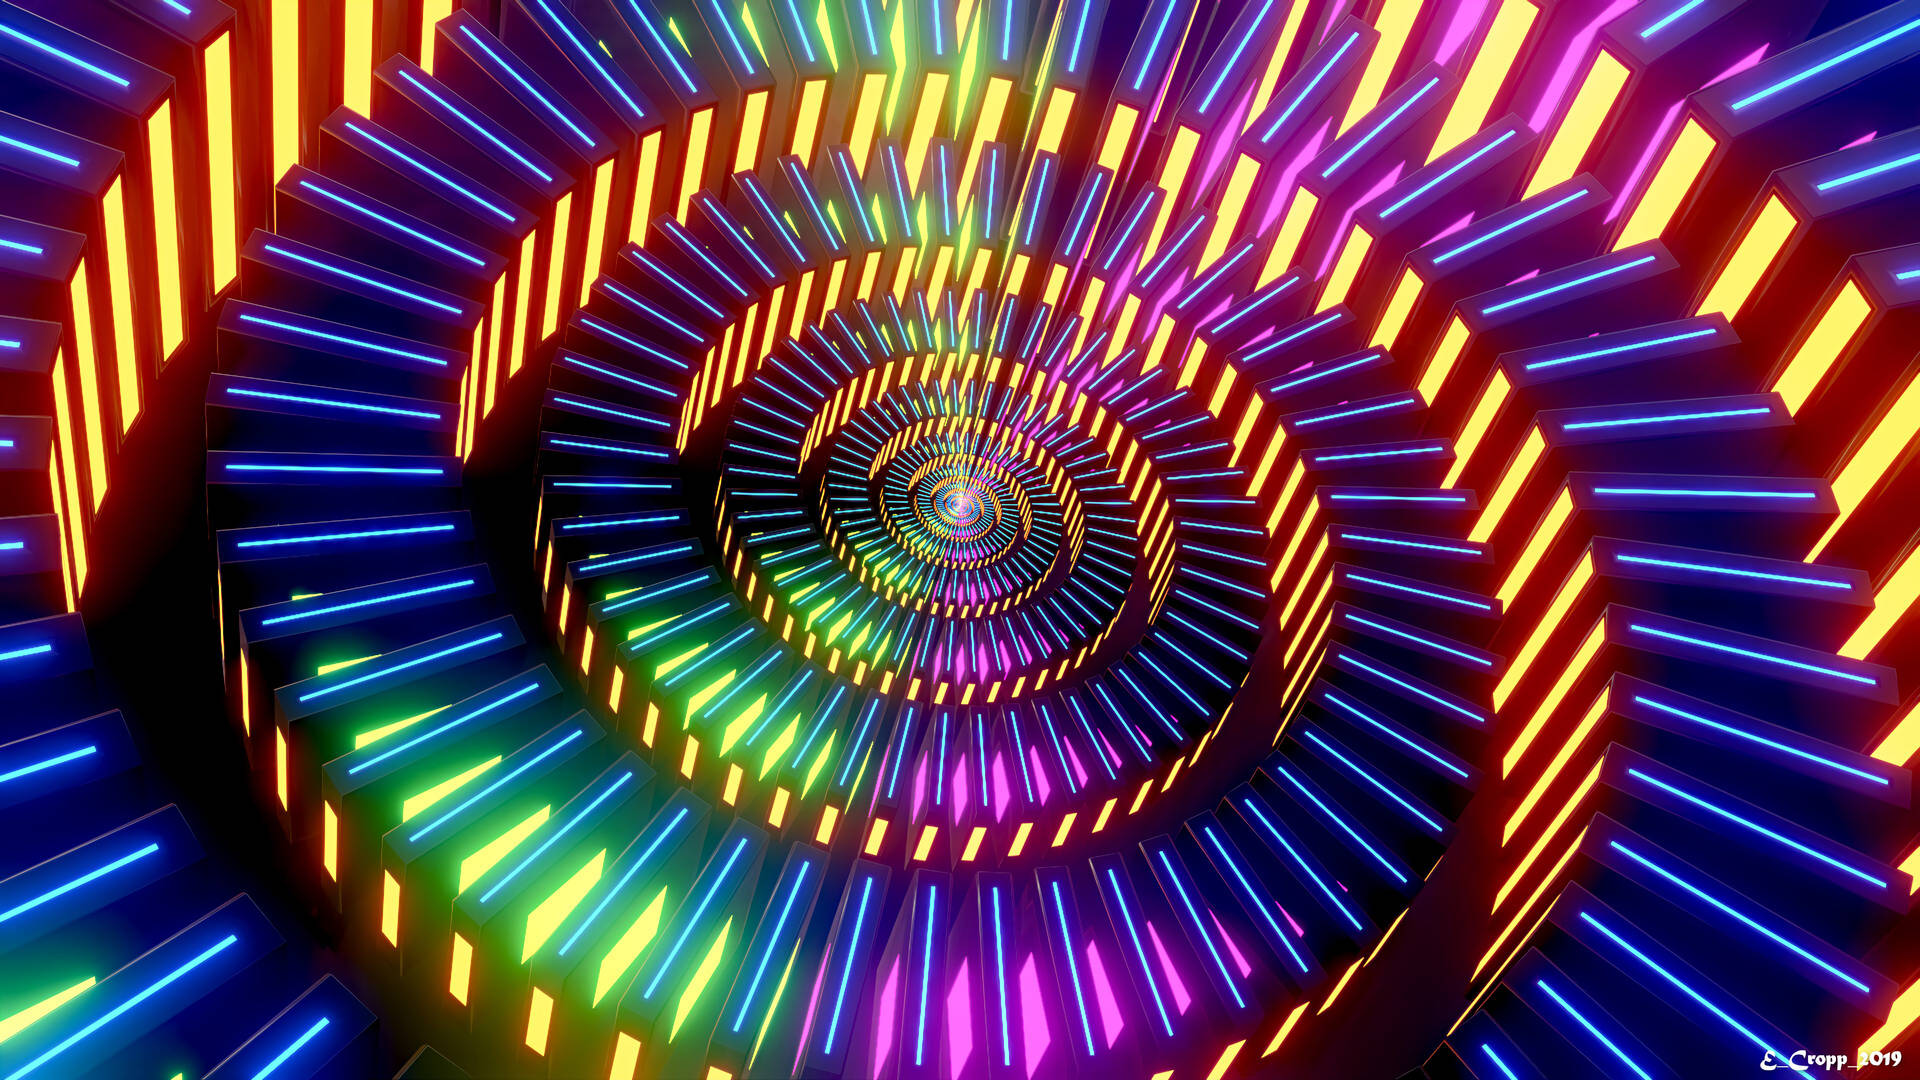 Abstract Glowing Spiral Art